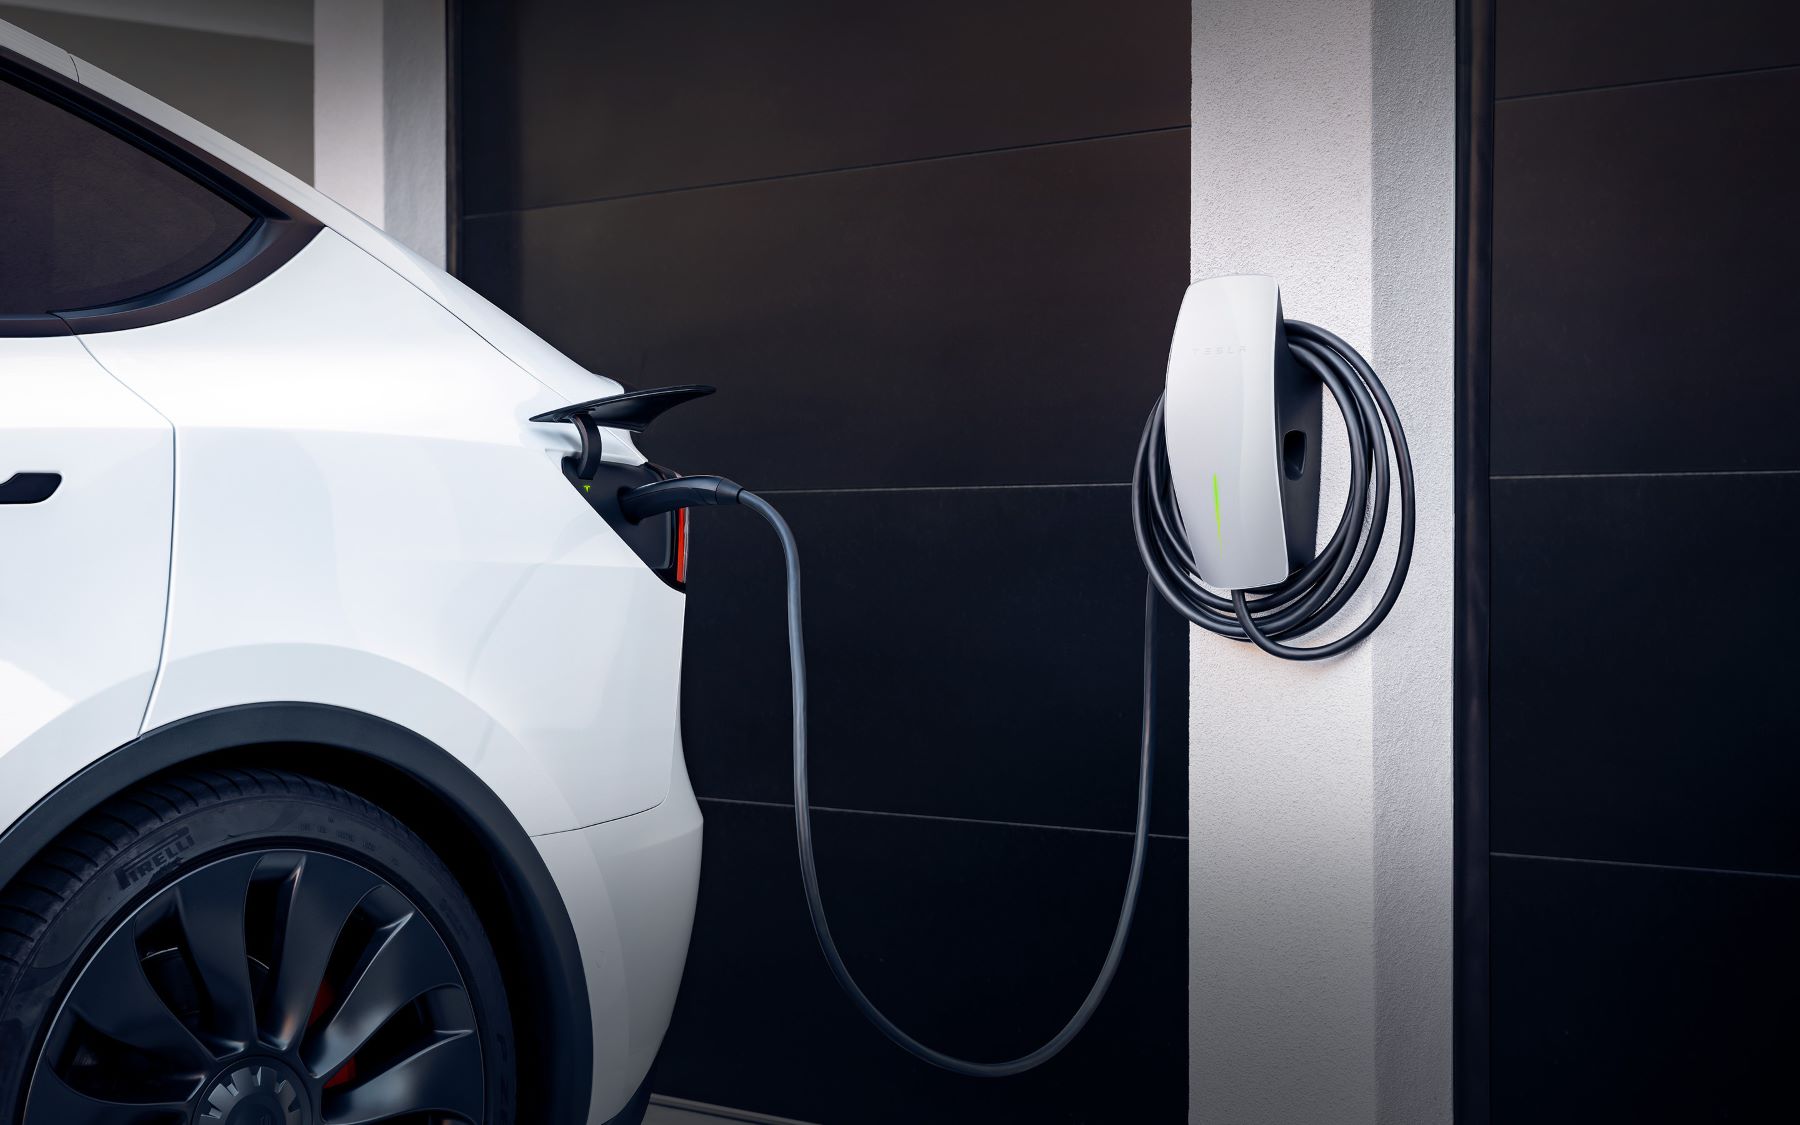 A Tesla Wall Charger plugged into a Tesla model at home